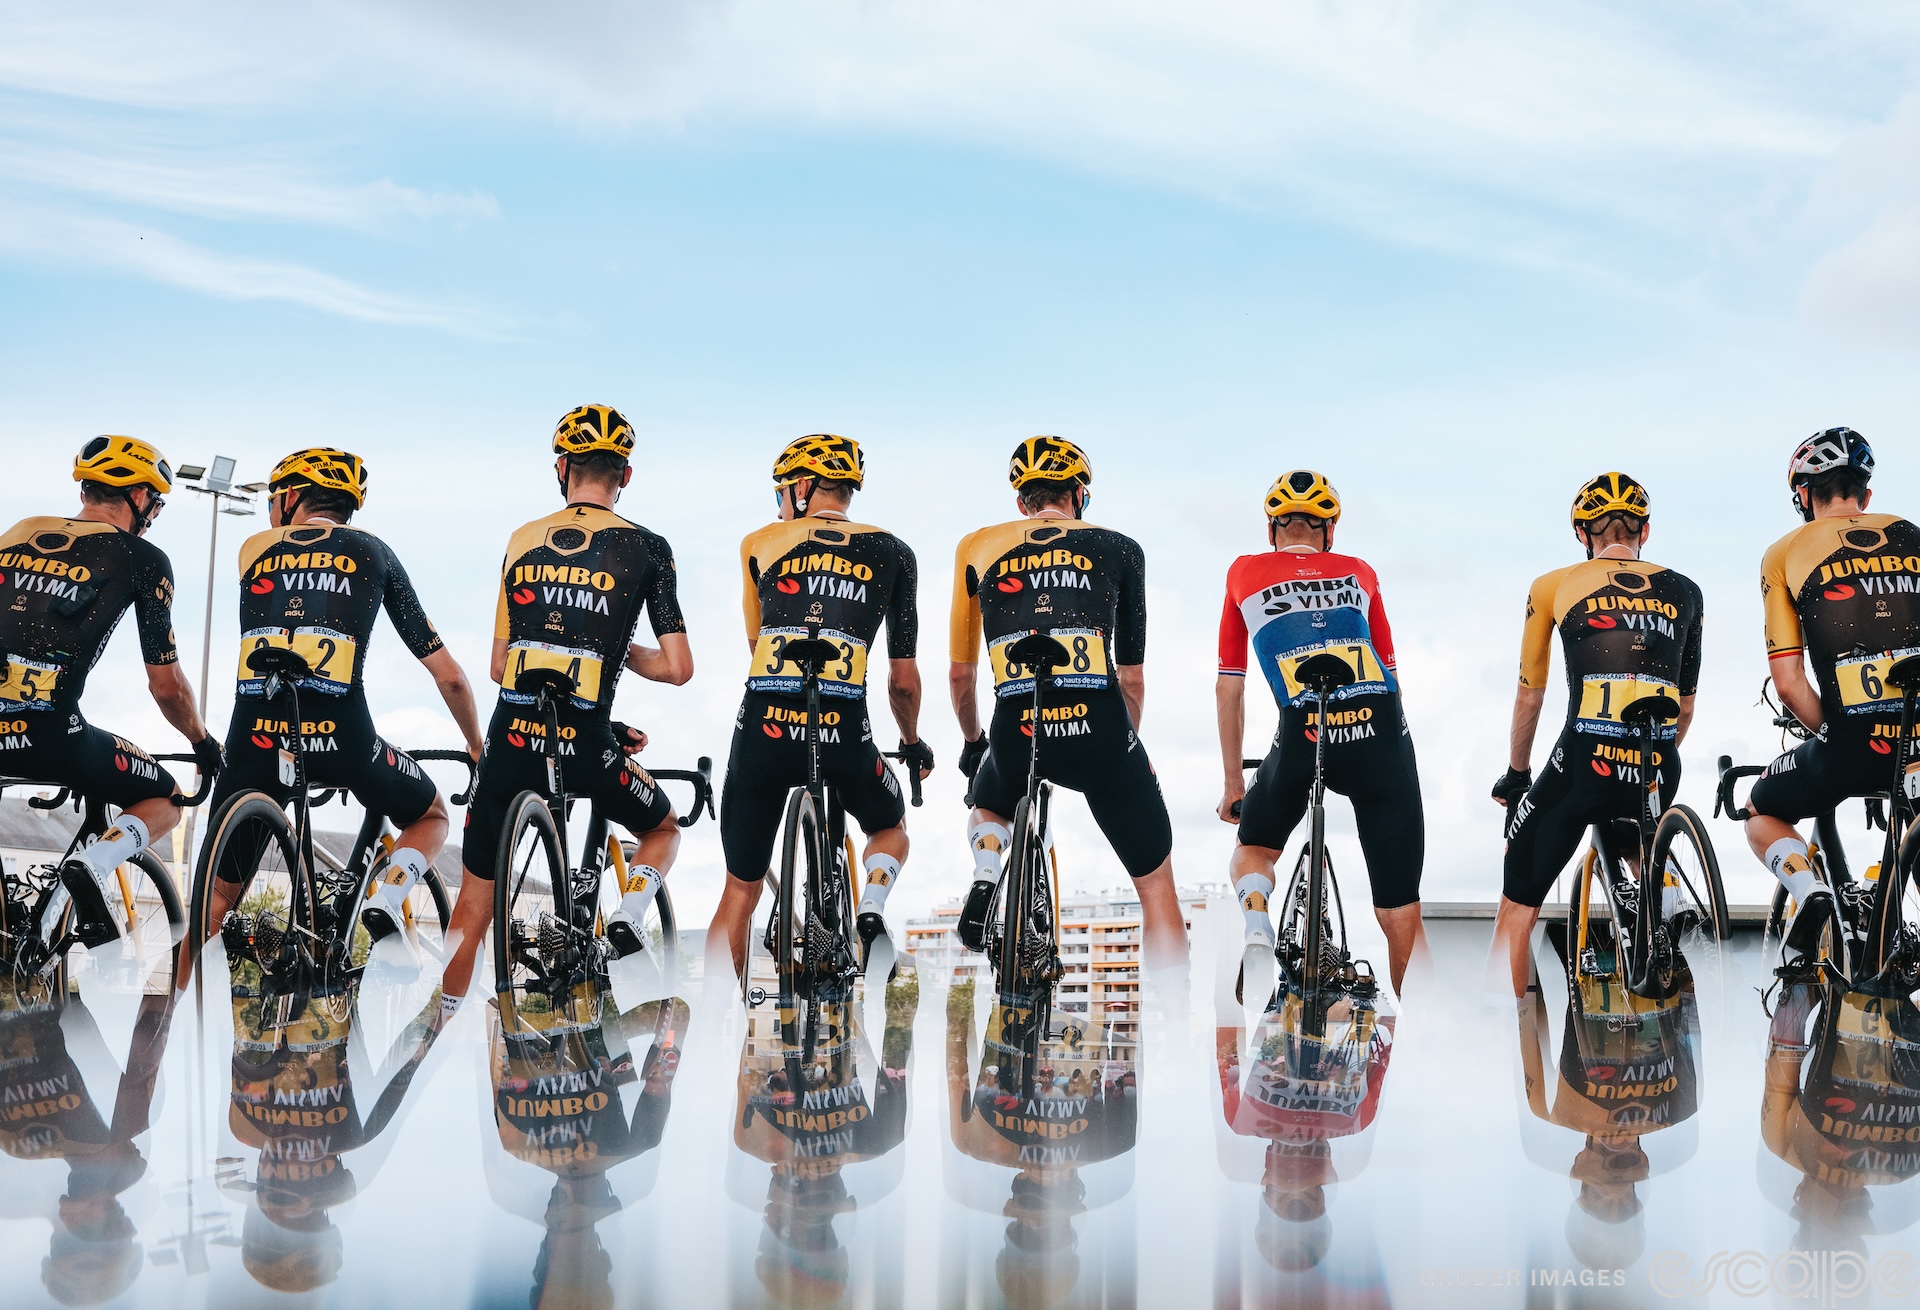 Jumbo-Visma stand on stage at sign-in during the Tour de France. The riders look out over an unseen crowd, and are shown reflected in the bottom third of the image in a trick of perspective